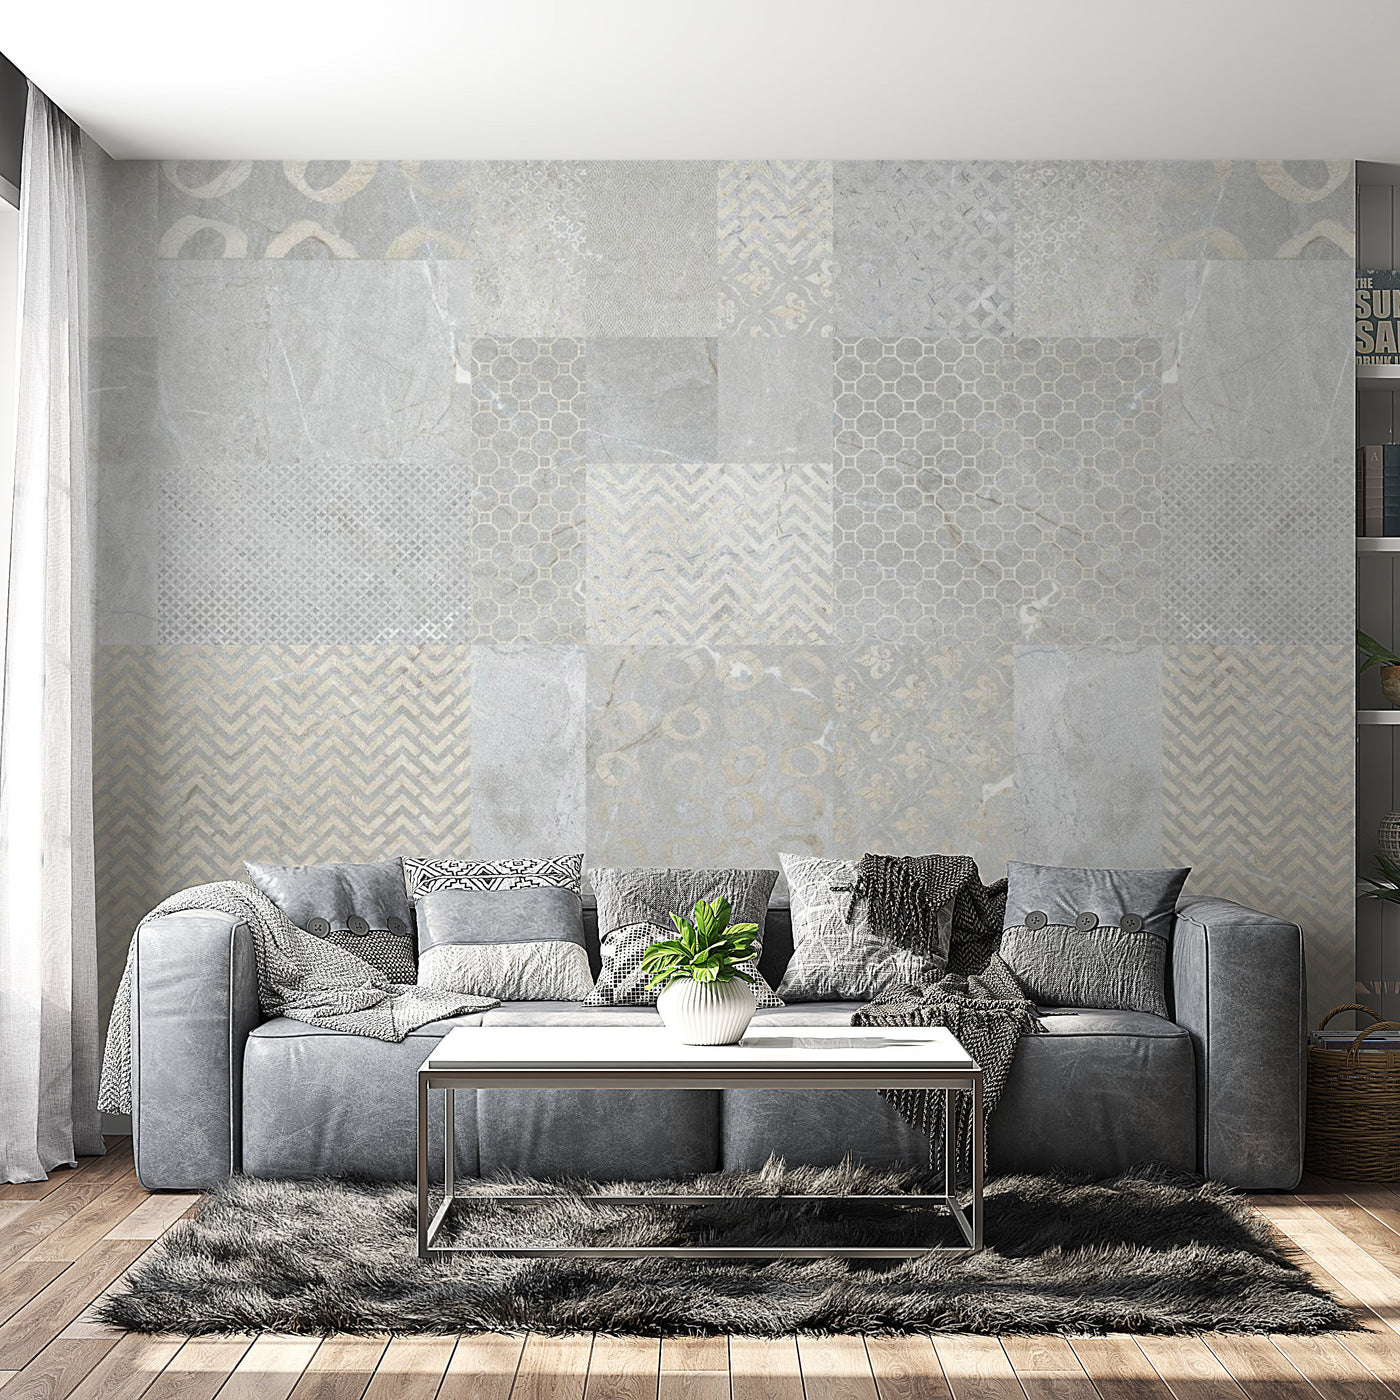 Peel & Stick Wall Mural - Abstract Concrete Tiles - Removable Wall Decals